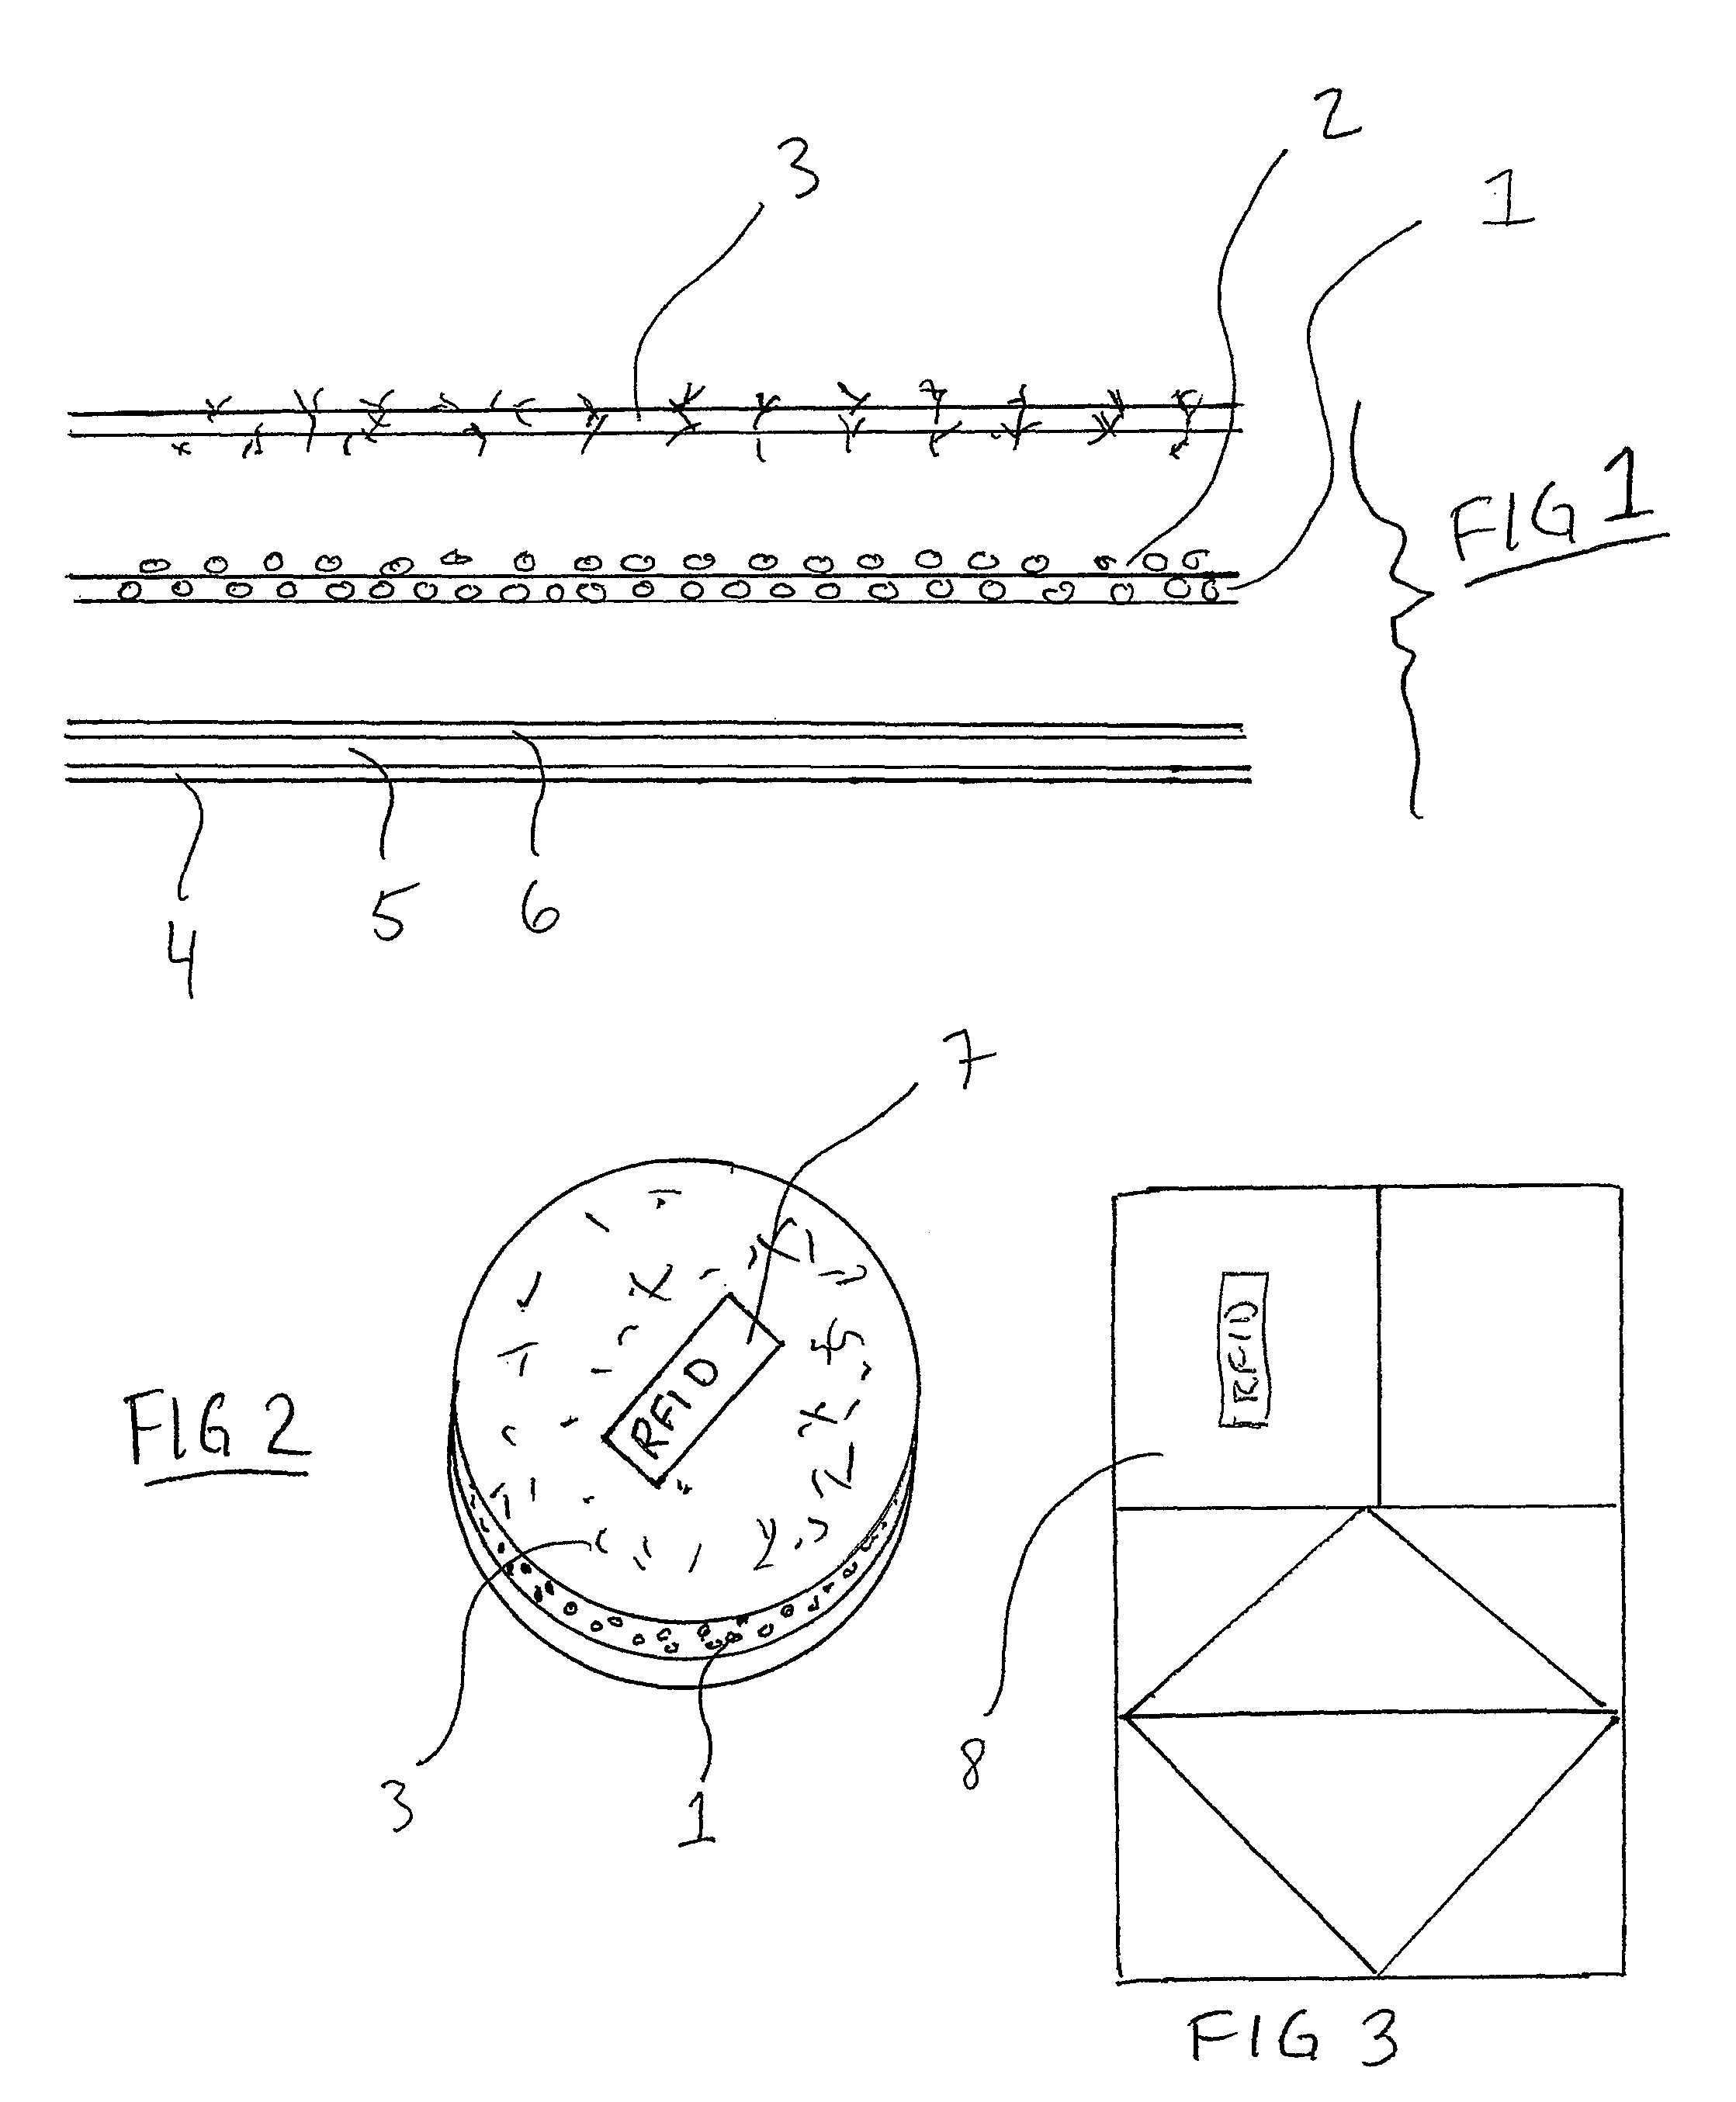 Seal absorbent pad-RFID-bar code device for a dosing cap